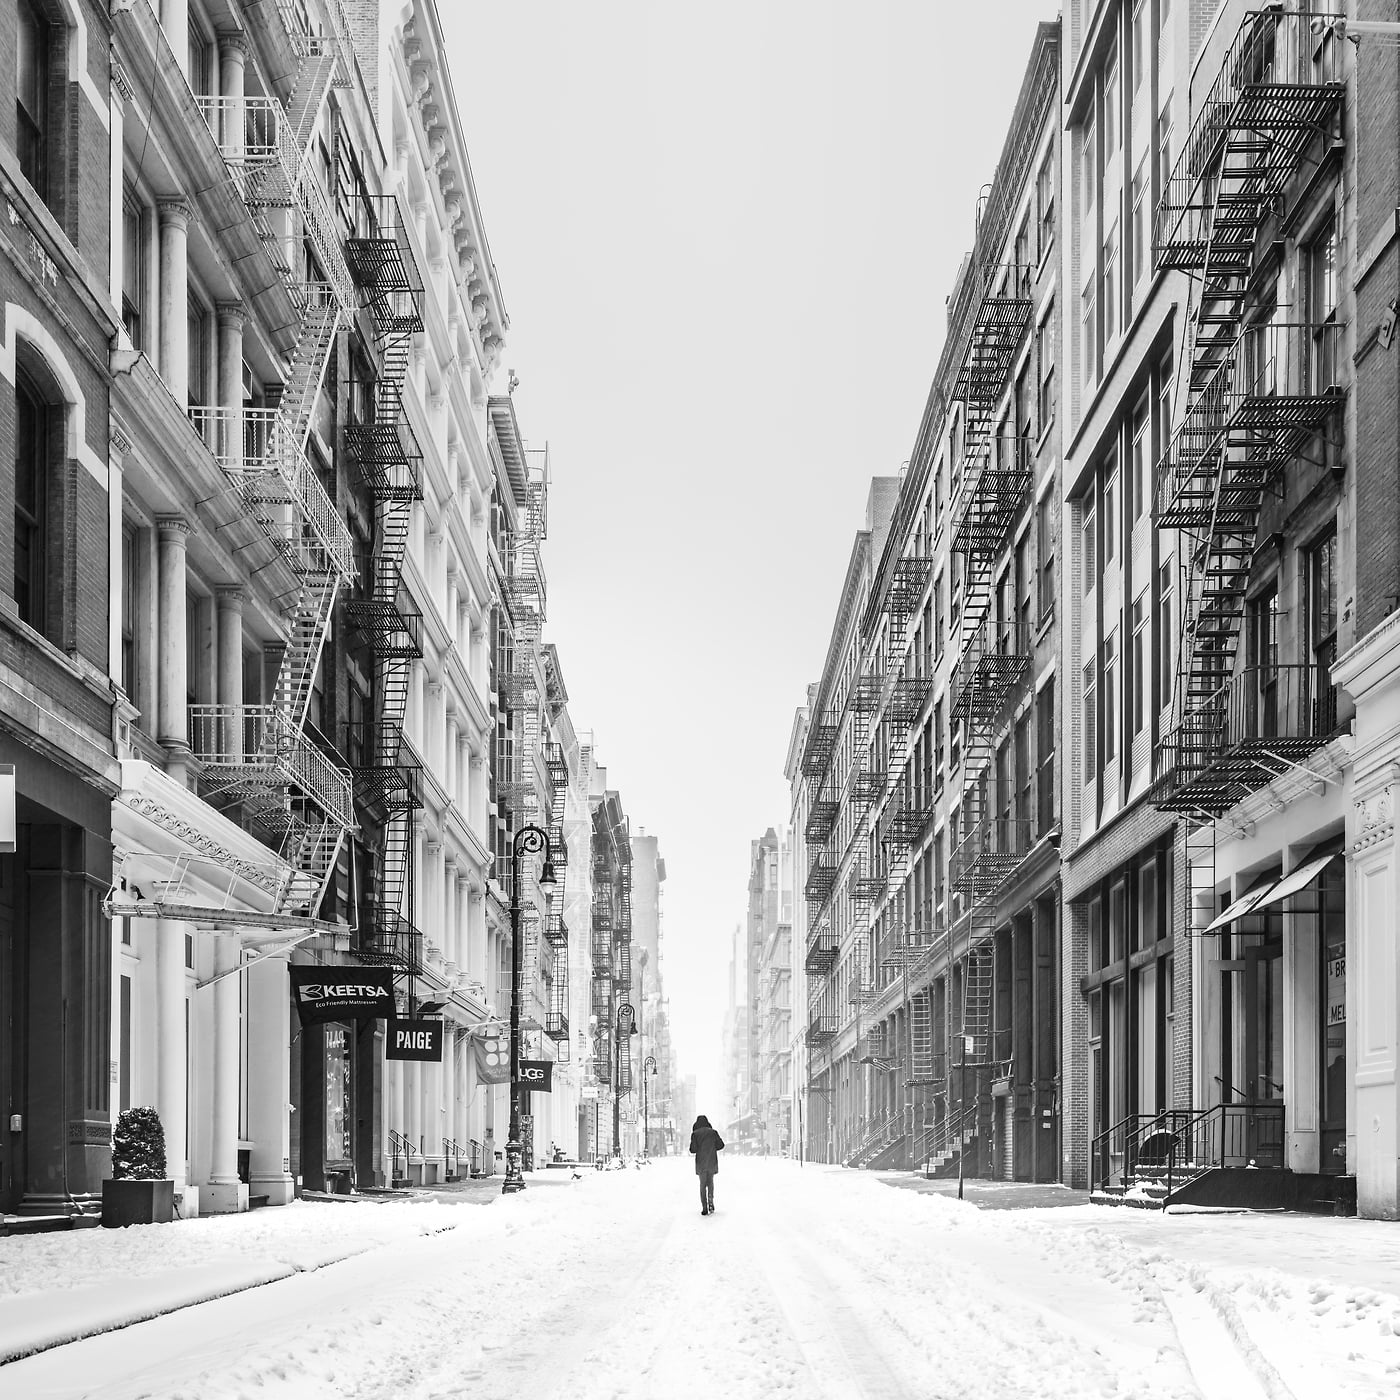 141 megapixels! A very high definition, large-format VAST photo print of Mercer Street in SoHo in NYC in winter snow; black and white fine art street photo created by Dan Piech in New York City.